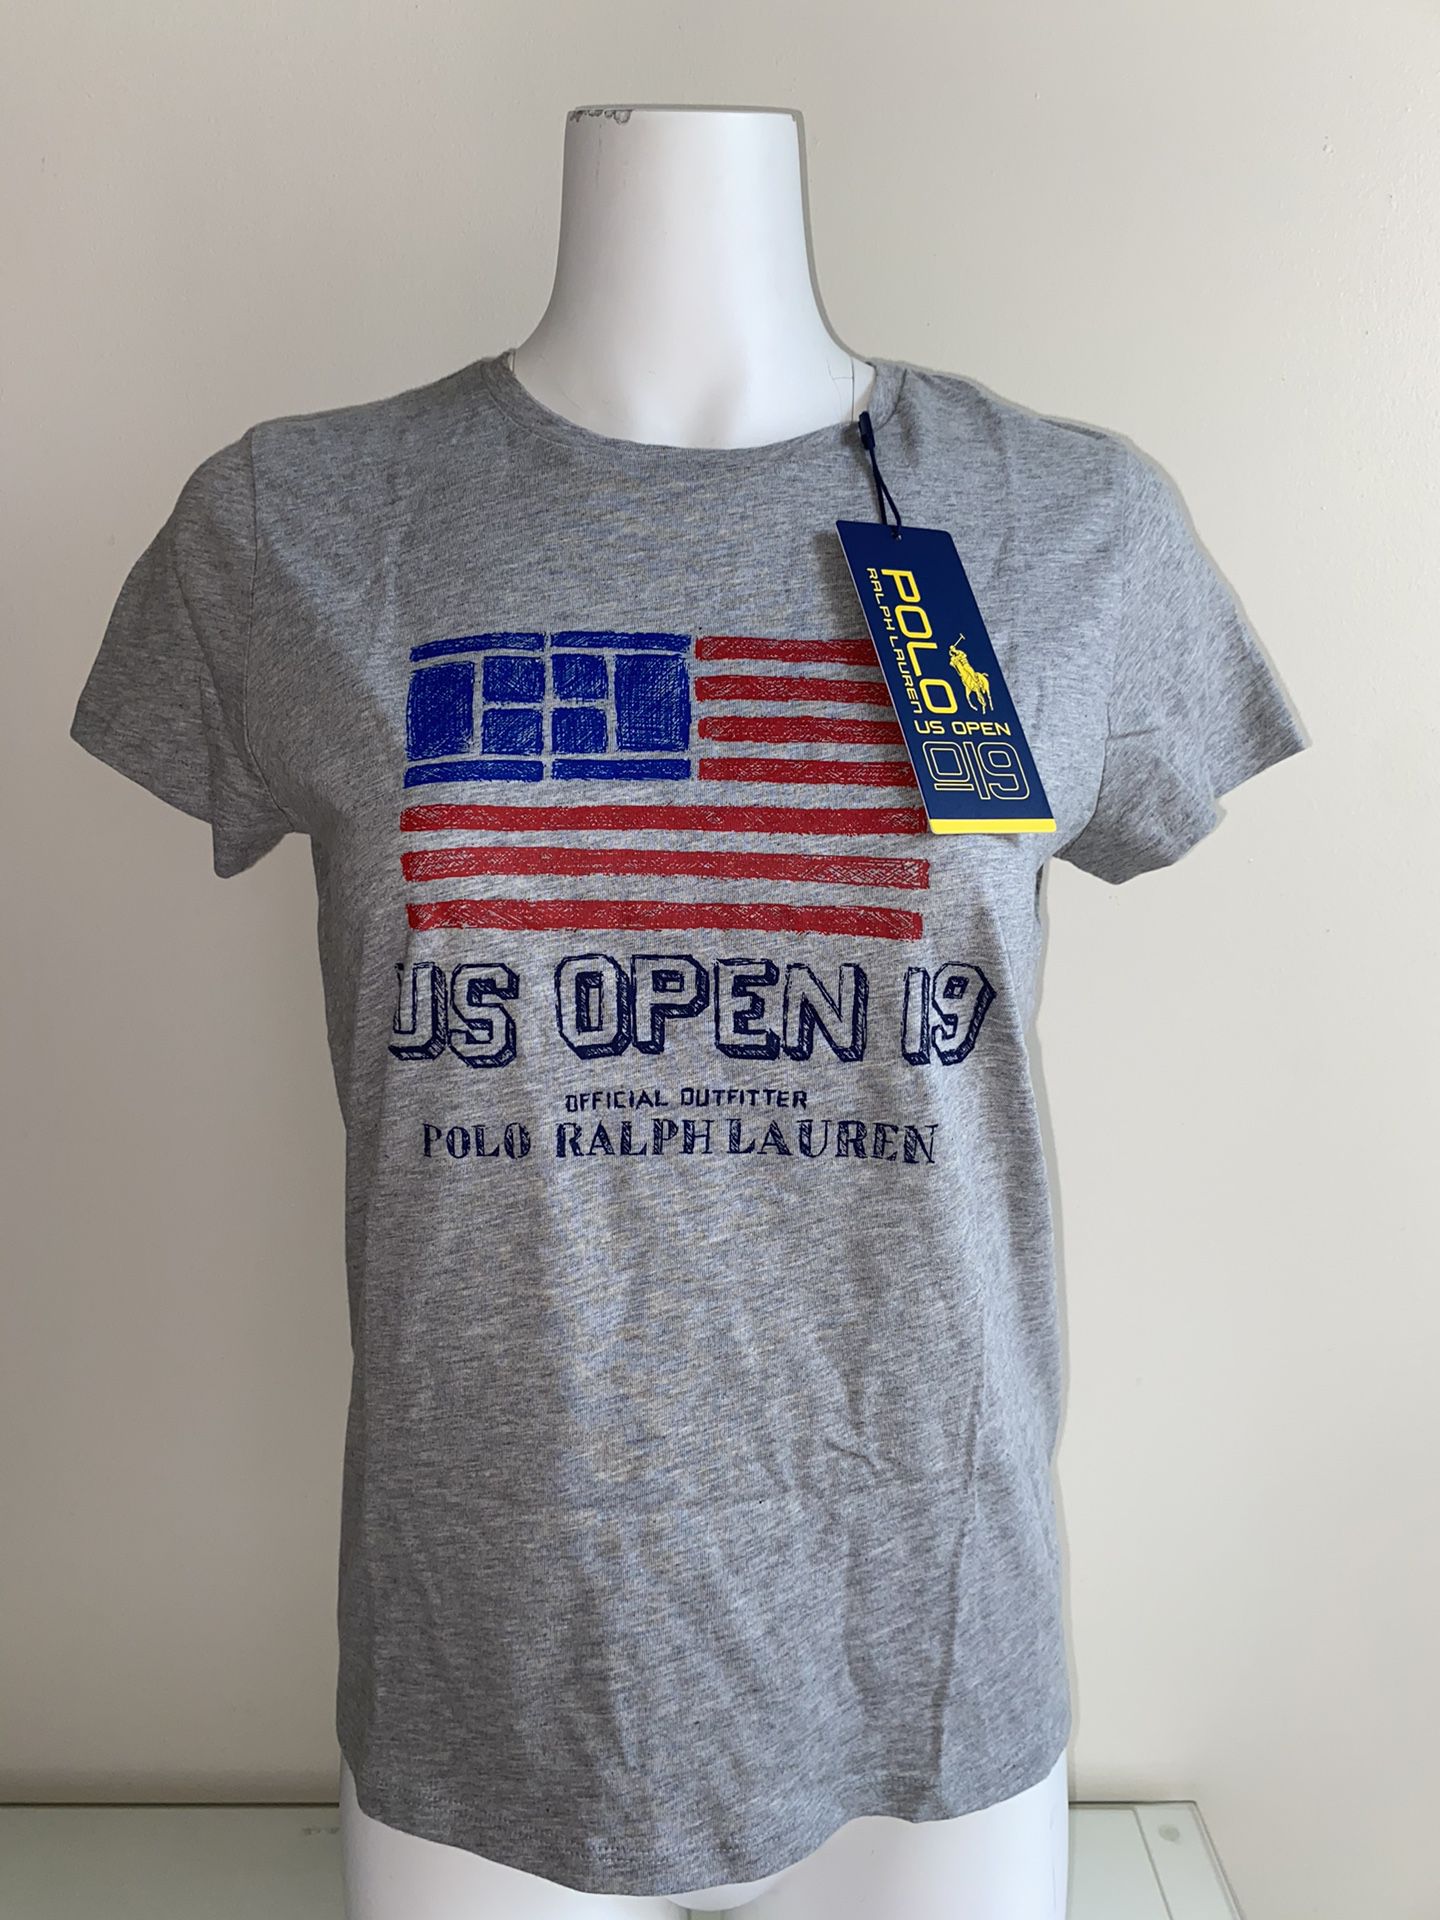 Polo Ralph Lauren - Limited Edition -  US Open 2019 Tennis - T-shirt - Women’s - Size small - American Flag